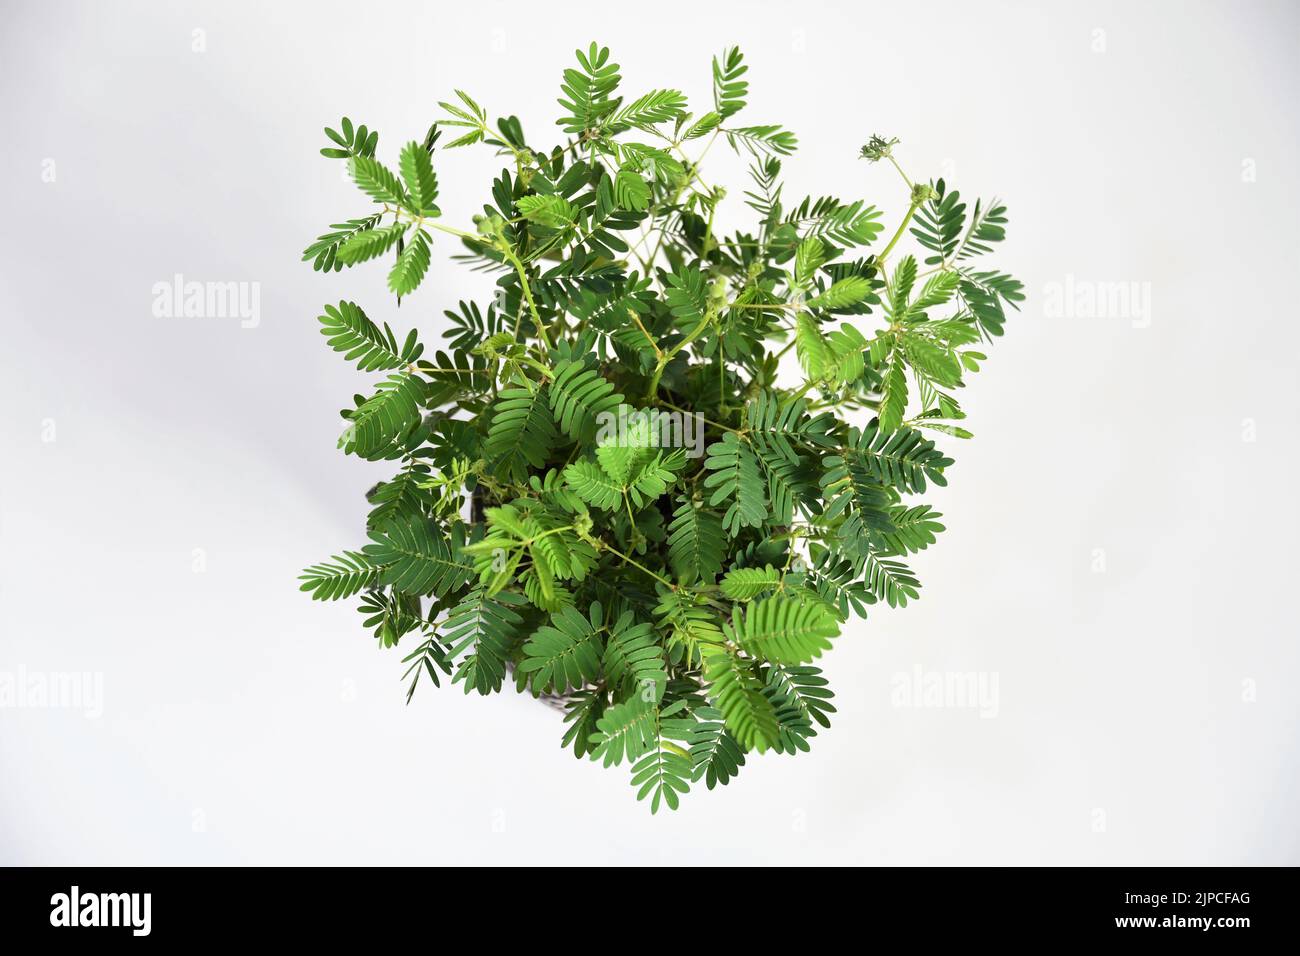 Mimosa pudica houseplant, also known as sensitive plant, sleepy plant, action plant, touch-me-not, and shameplant. Isolated against a white background Stock Photo